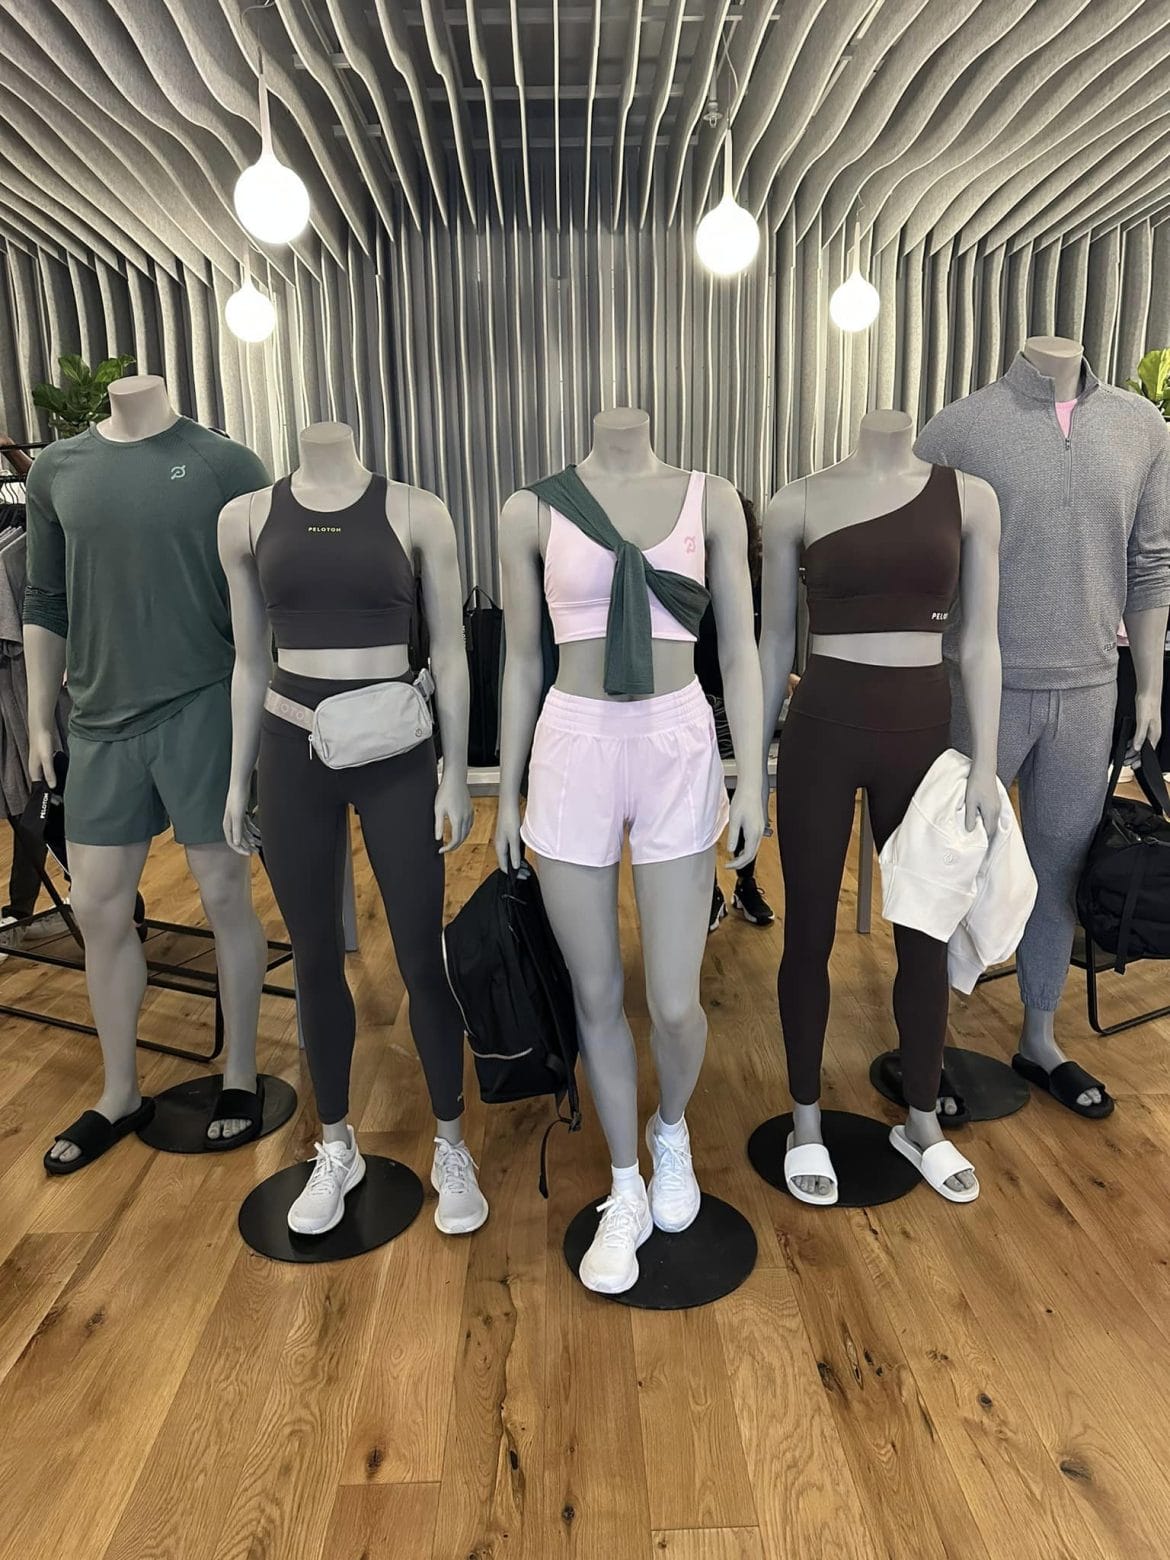 Lululemon is the official Peloton primary apparel partner - View